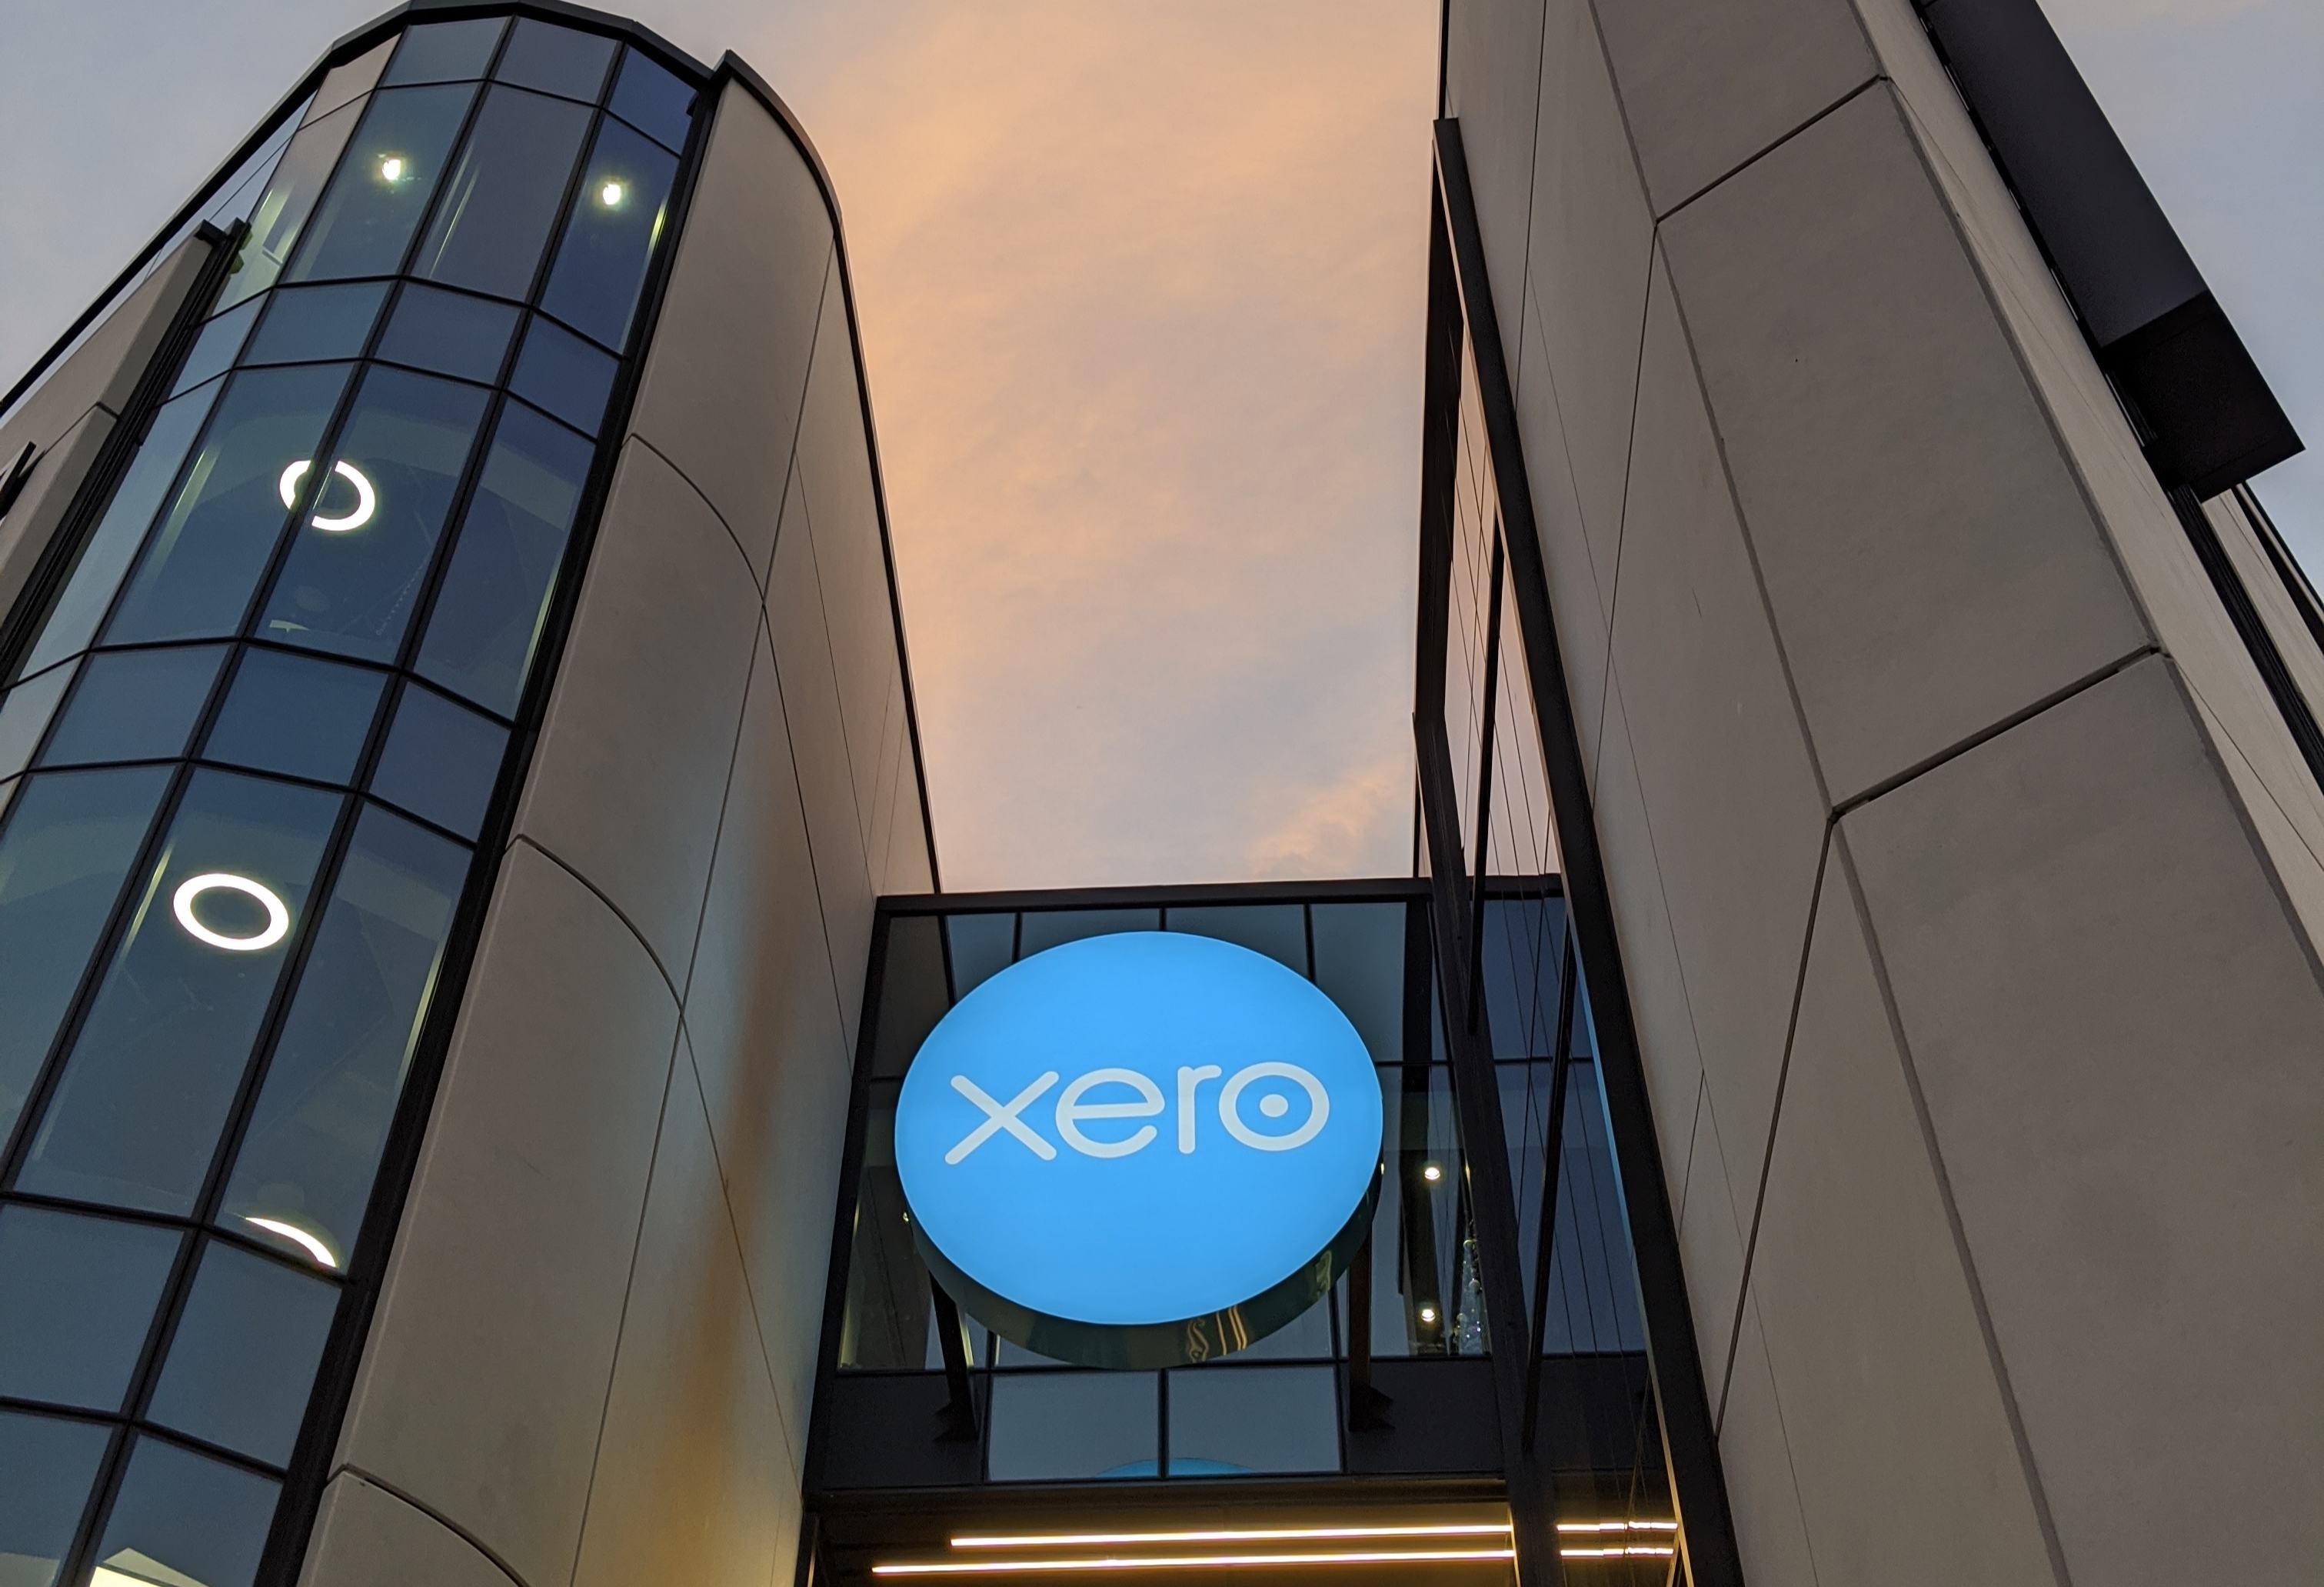 Xero posts 18% jump in FY21 operating revenue amid Covid-19 recovery